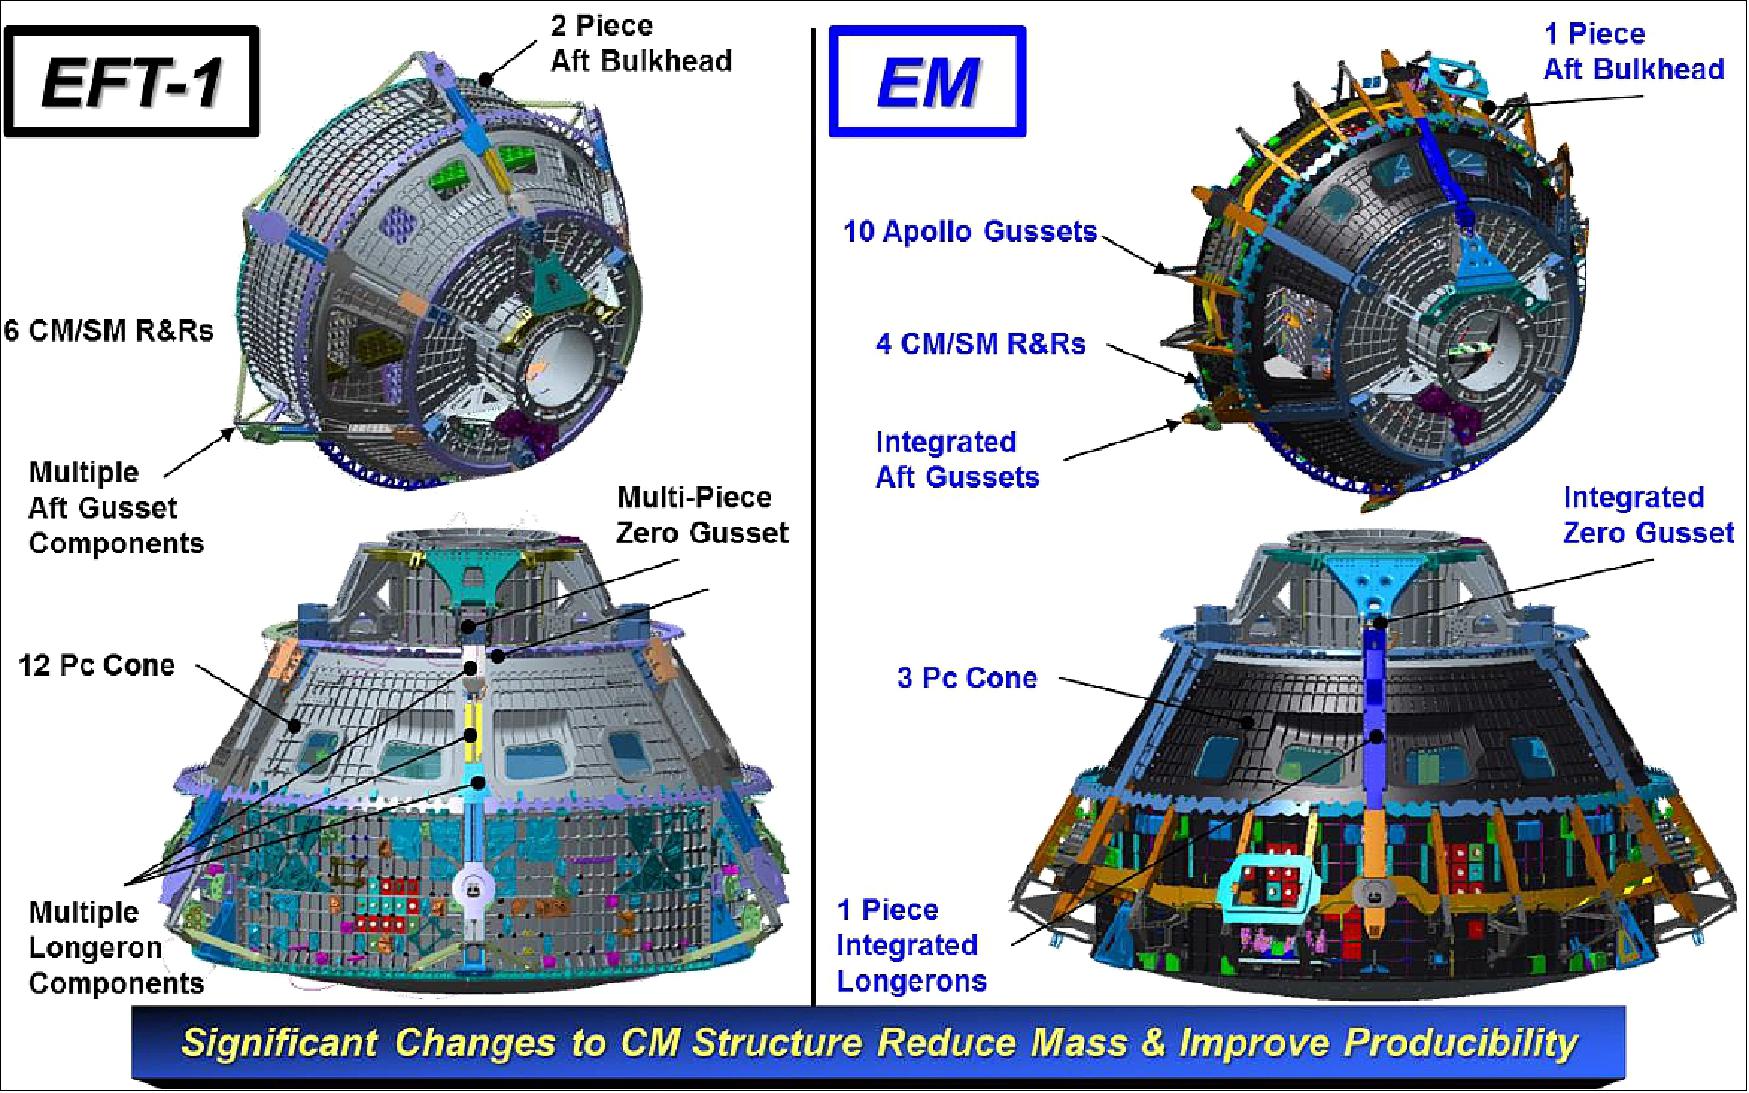 Figure 11: A simplification and reduction of structural parts has been realized by the lessons from EFT-1 (image credit: NASA, Lockheed Martin)